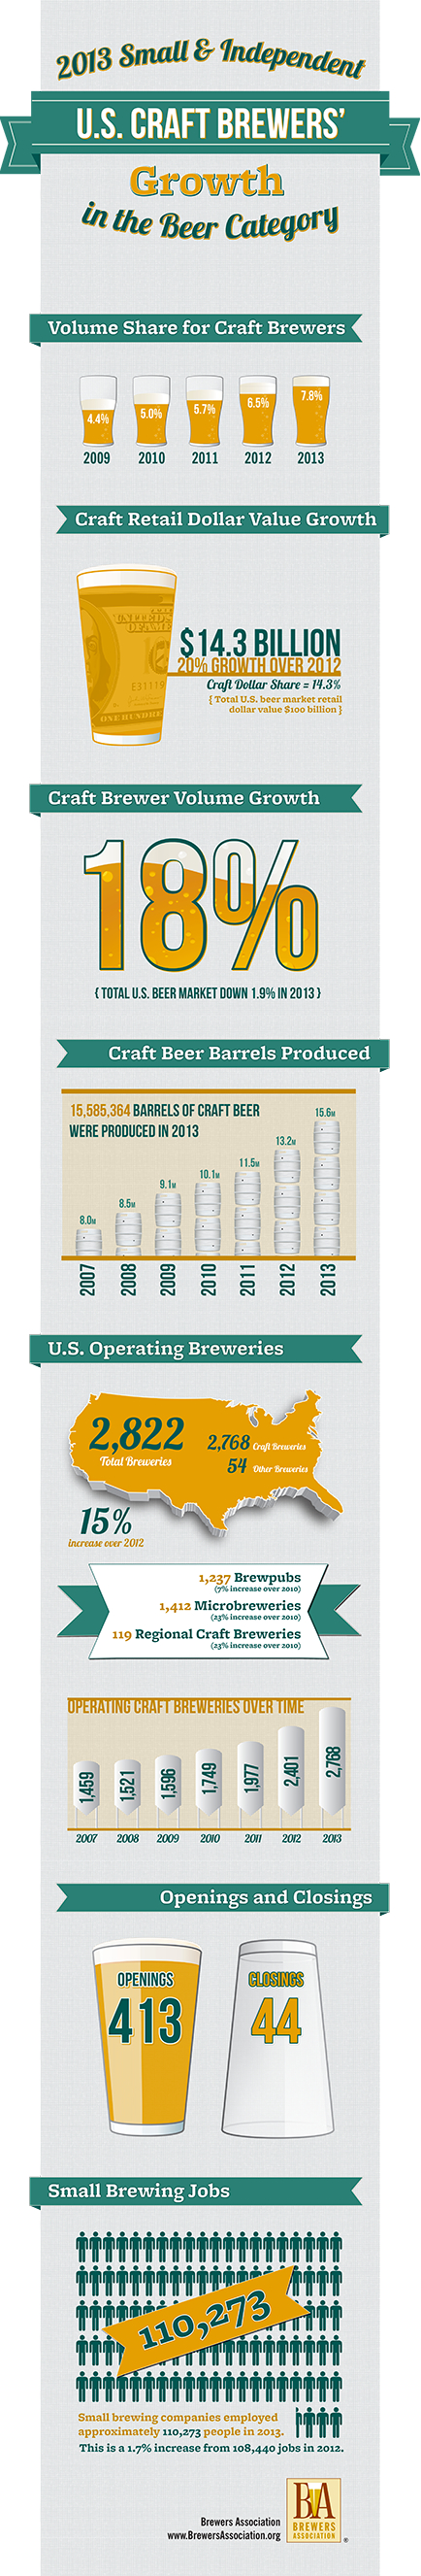 craft-beer-growth-2013